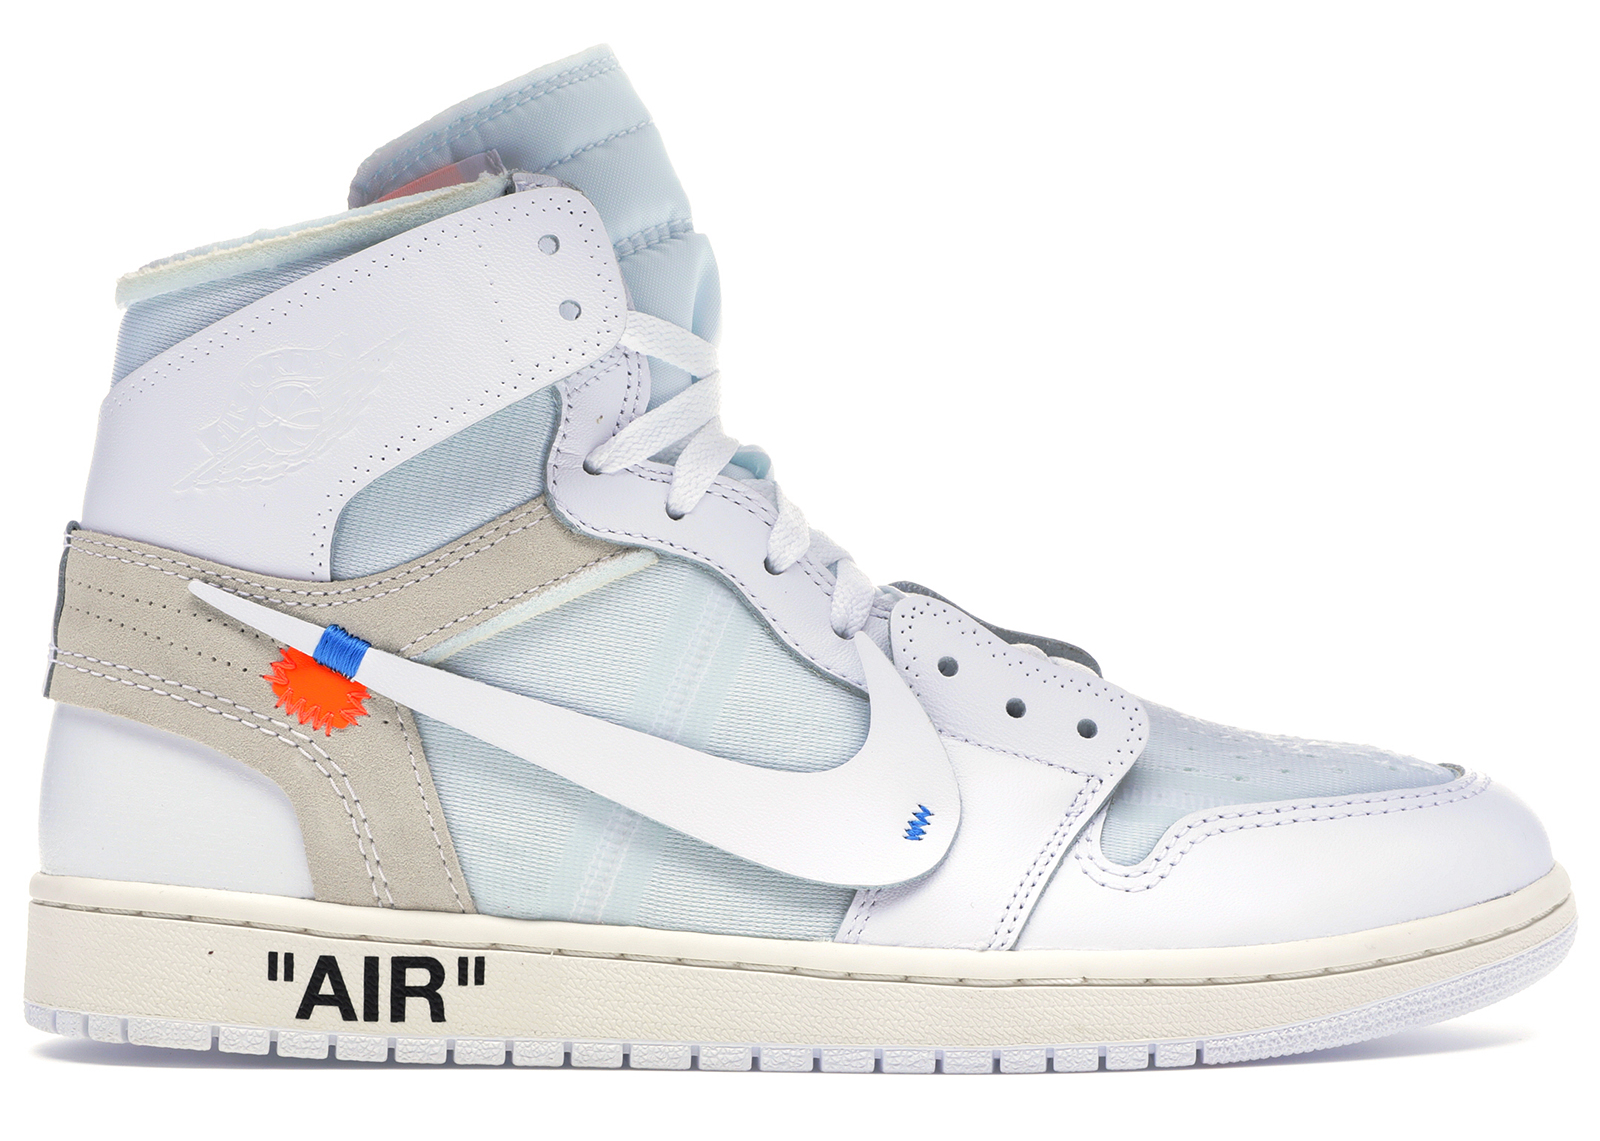 Buy Air Jordan 1 OFF-WHITE Shoes & New Sneakers - StockX